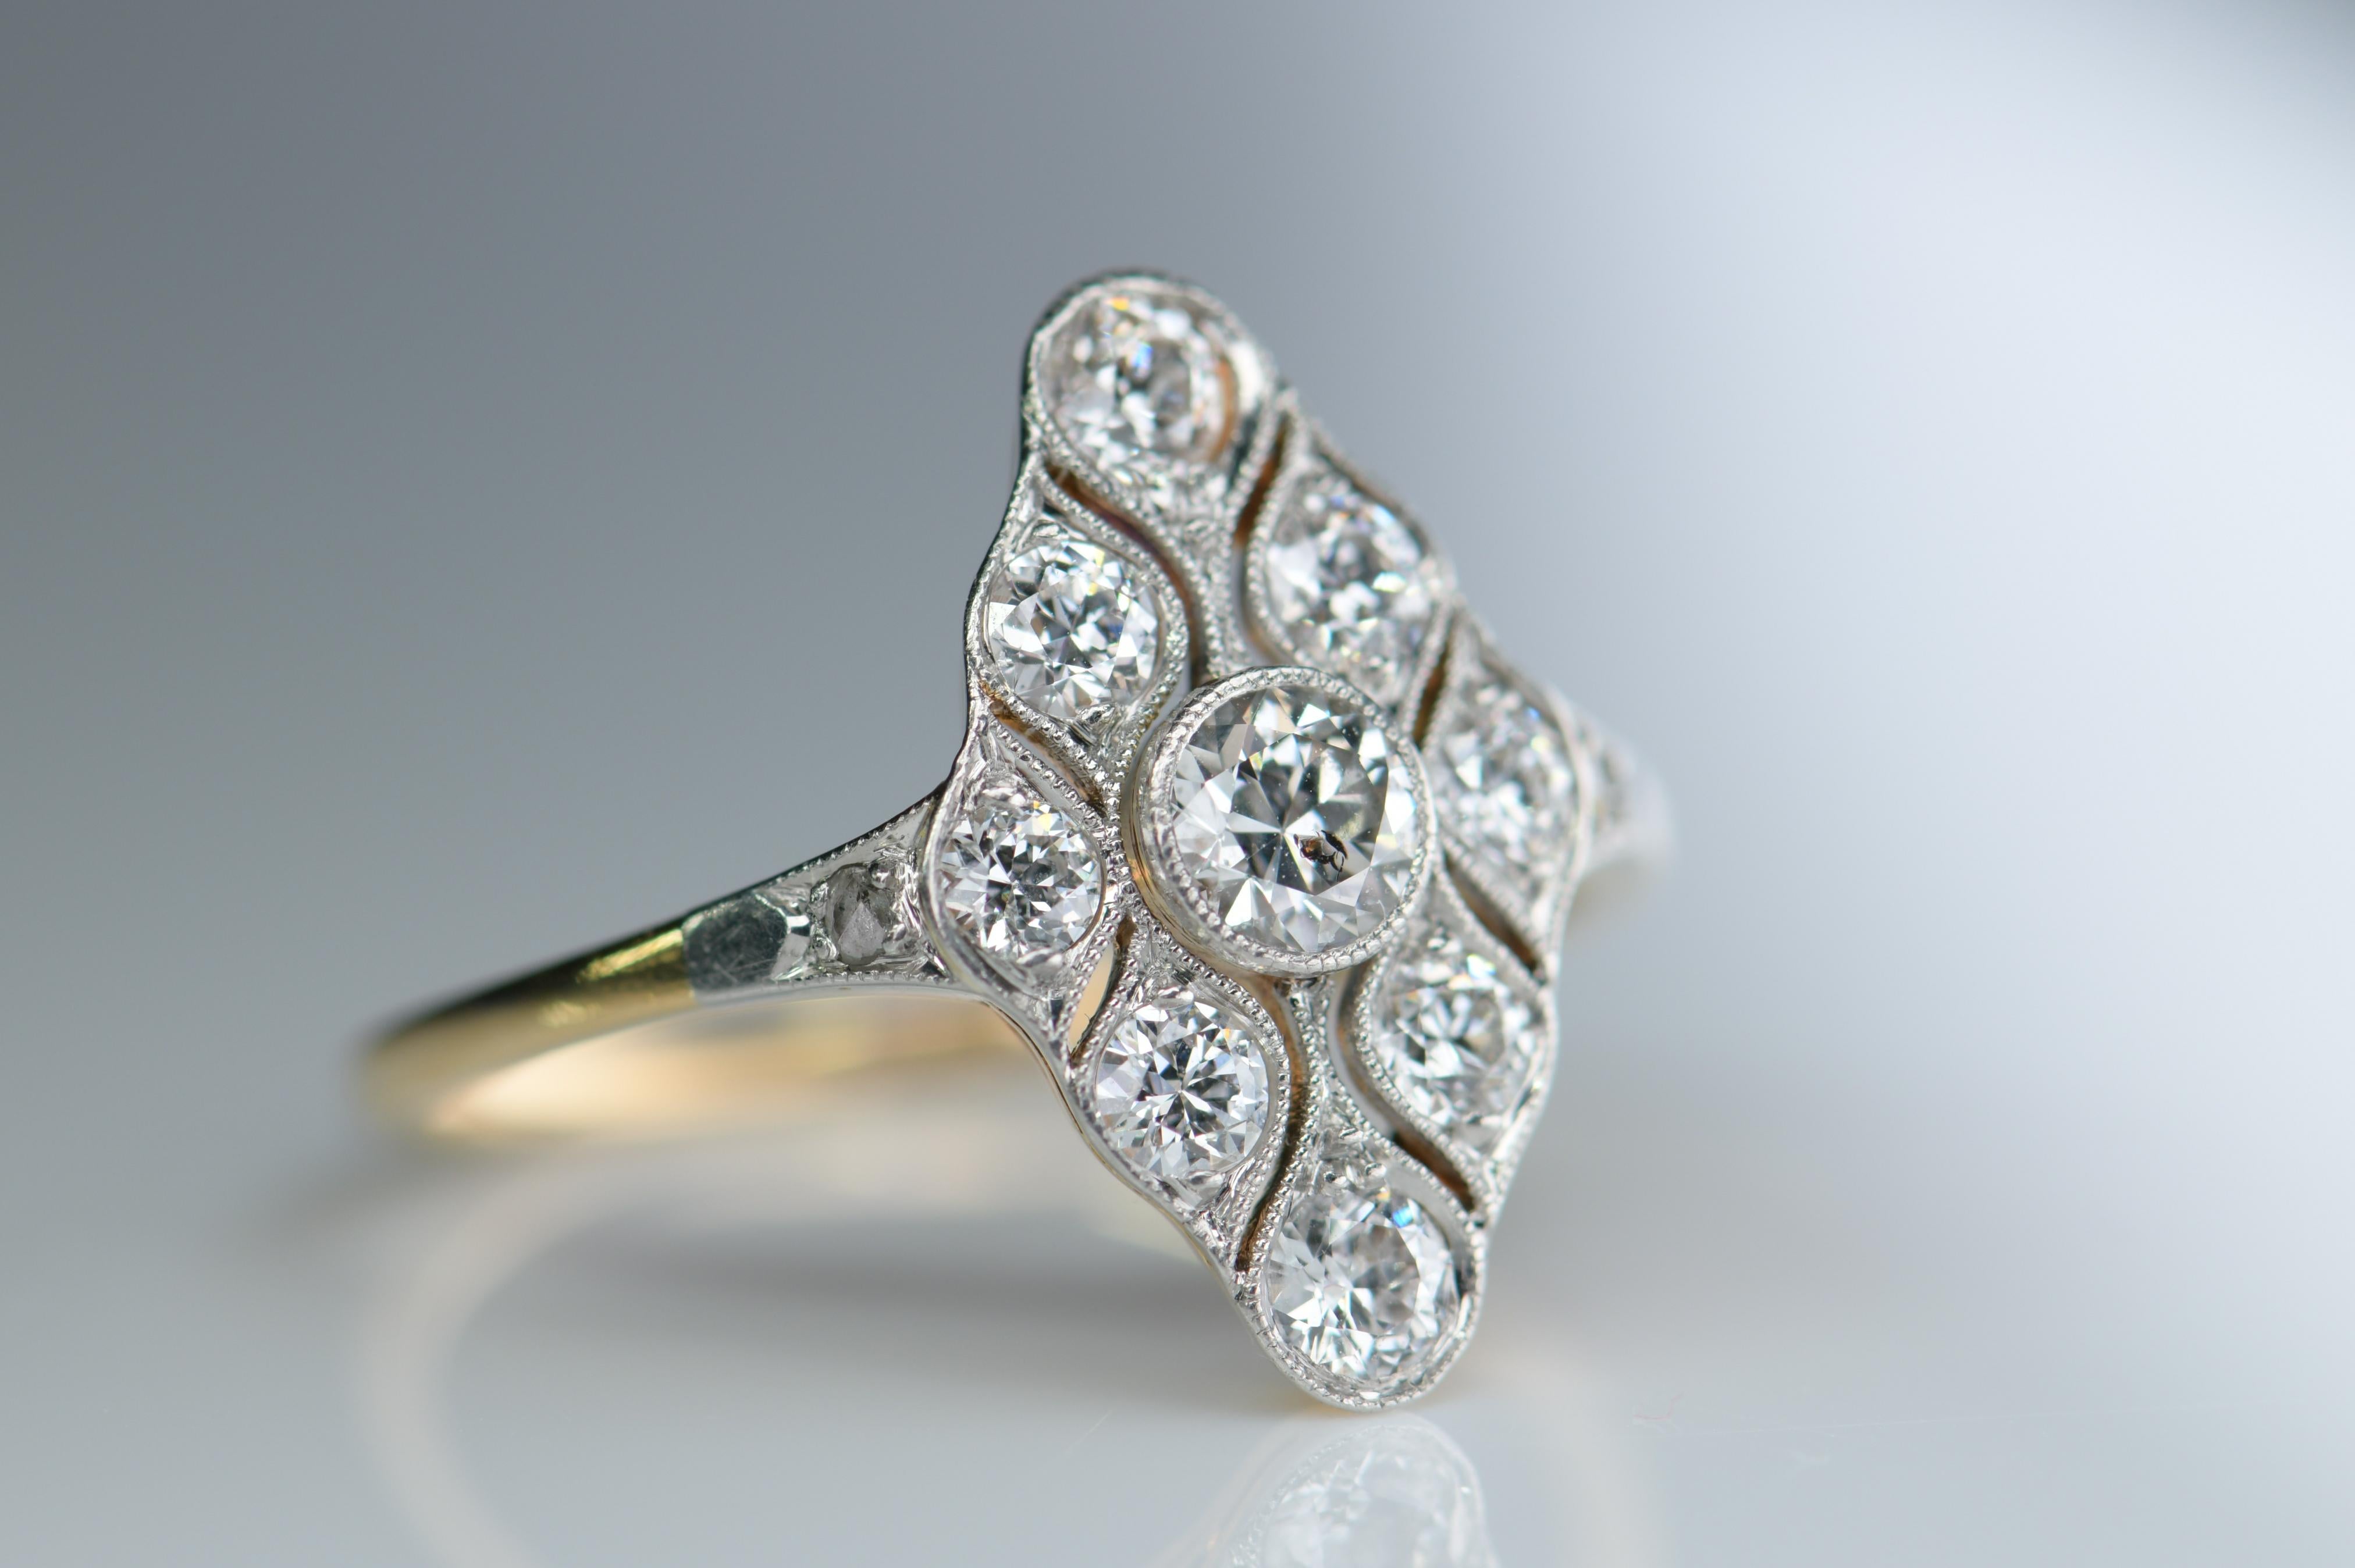 Dandelion Antiques Code: AT-0608

An unusual Art Deco ring that was made circa 1920. The shank is 18ct white gold with a platinum top. It is a neat design with a band of diamonds crossing the rhombus shape section on to the shoulders. The diamonds